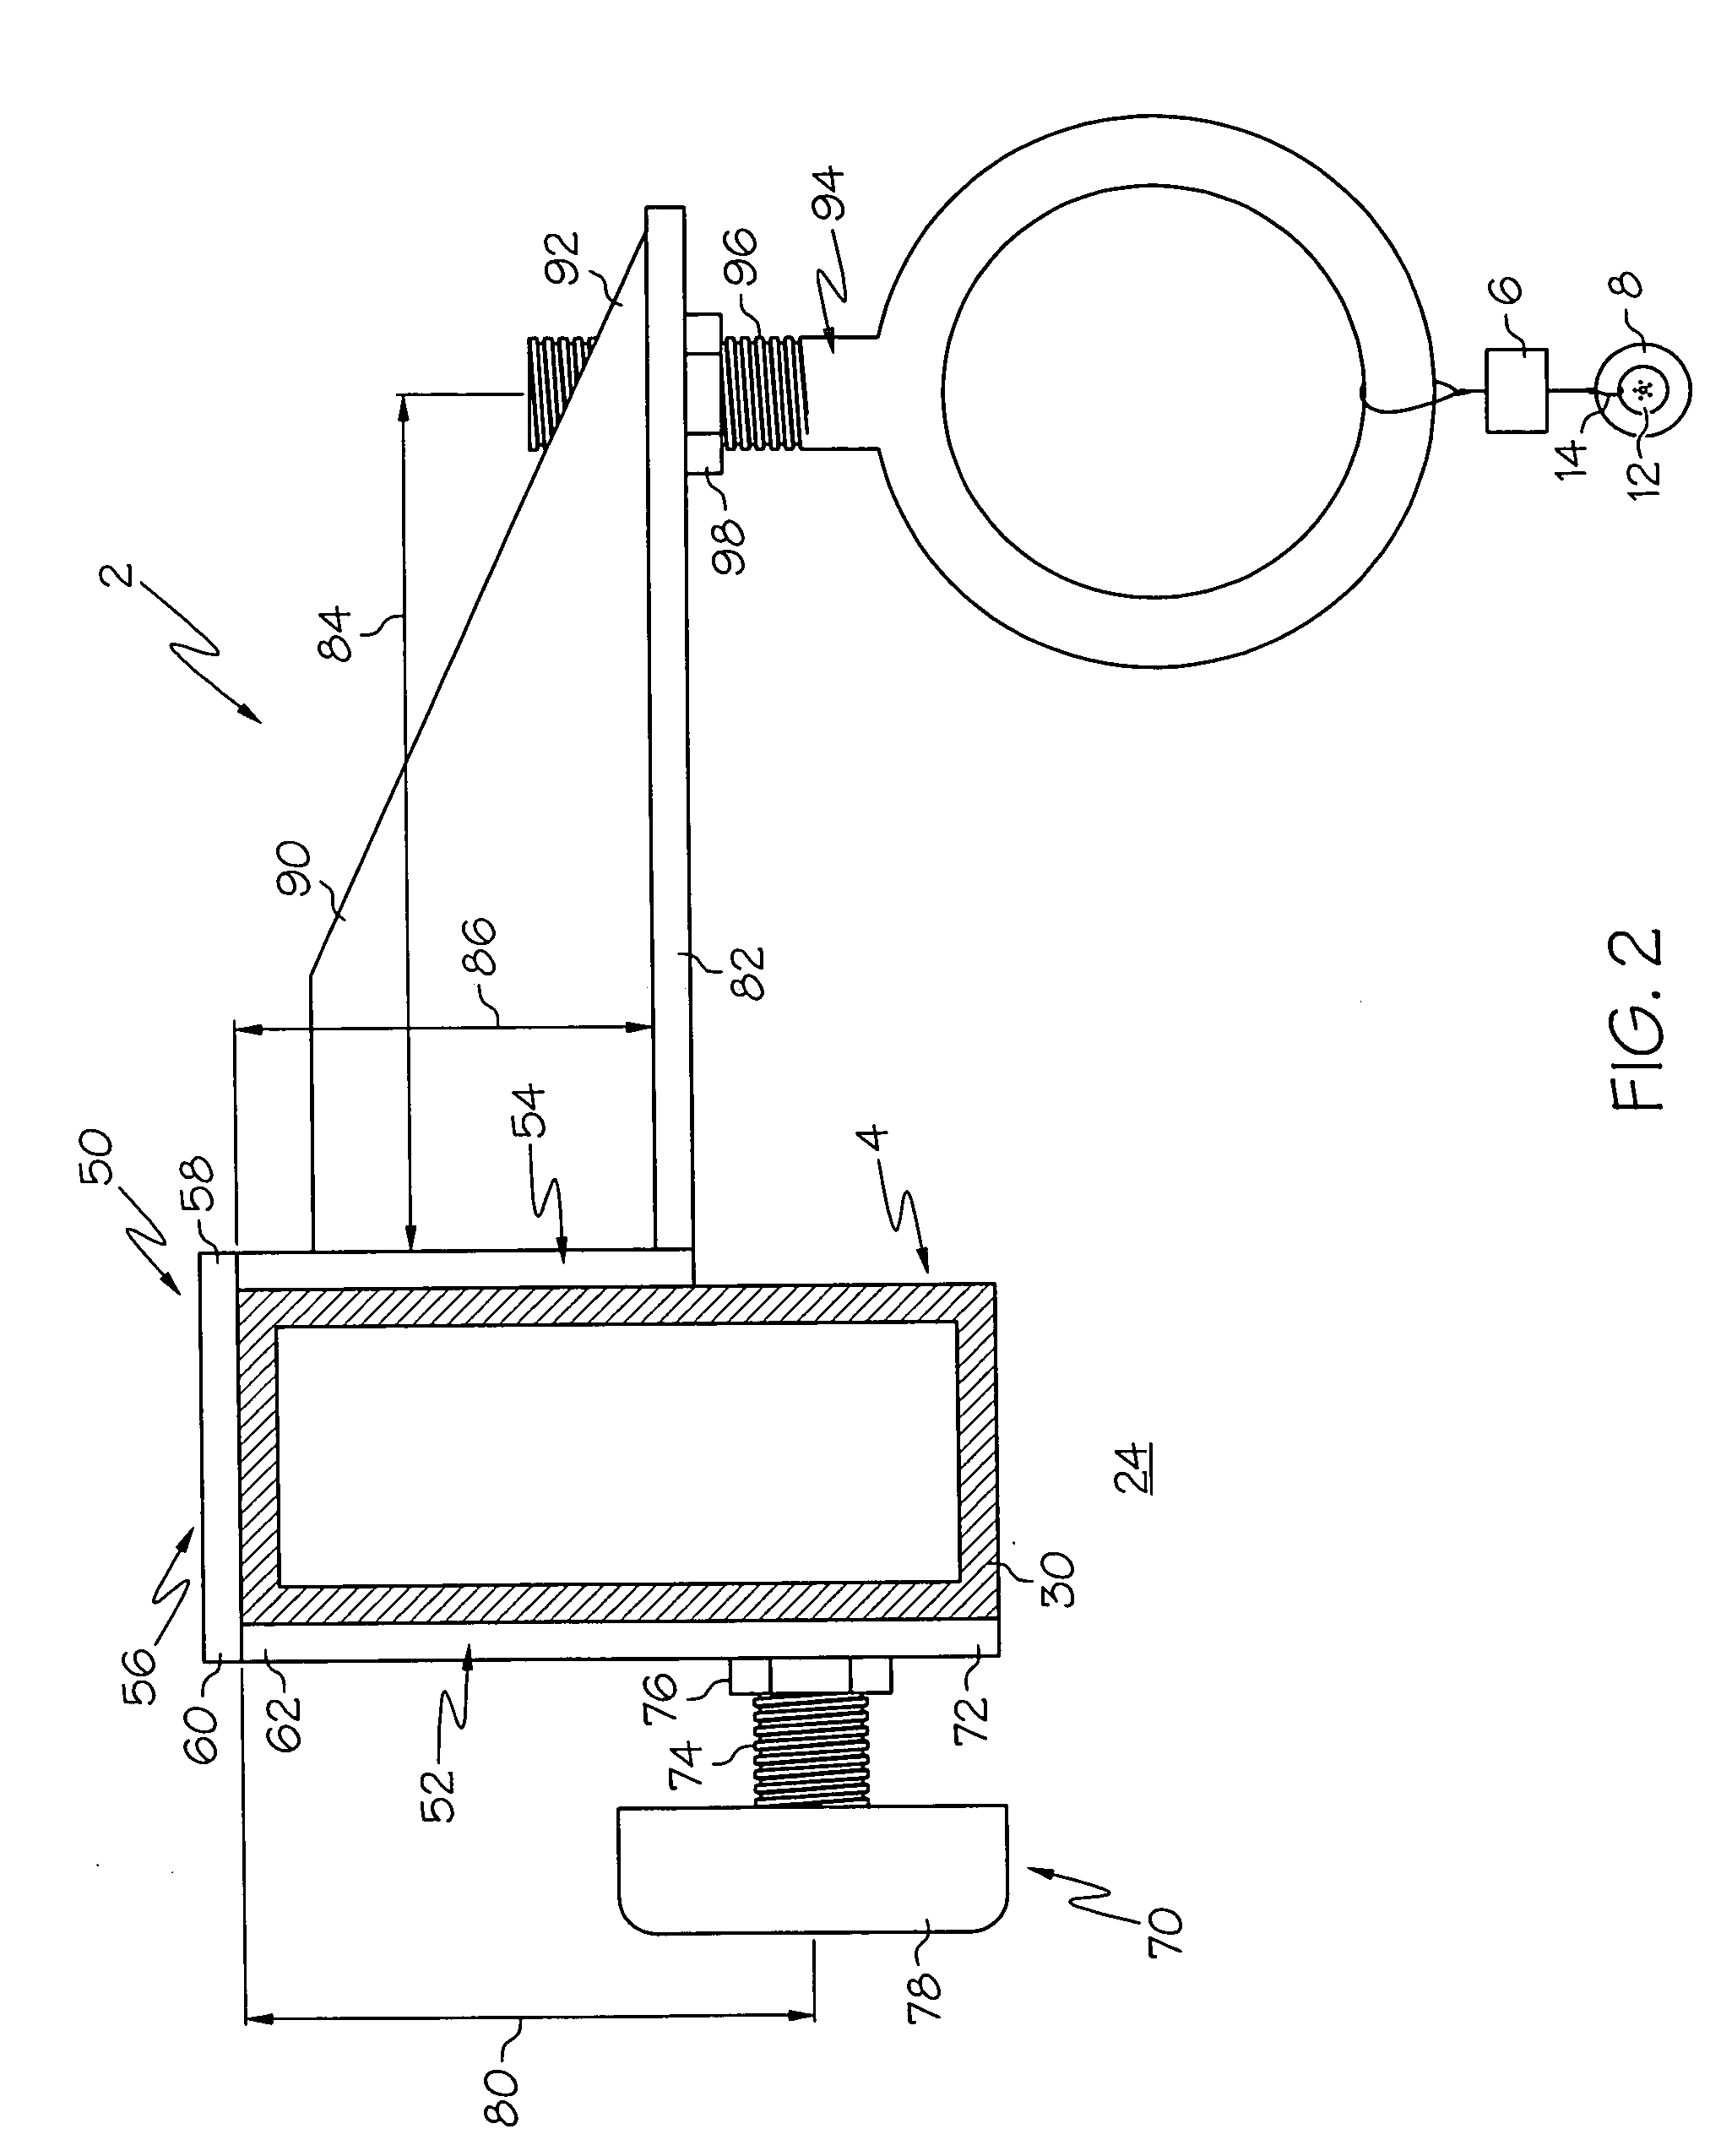 Tire testing machine with removable hanger hoist and method for loading a tire